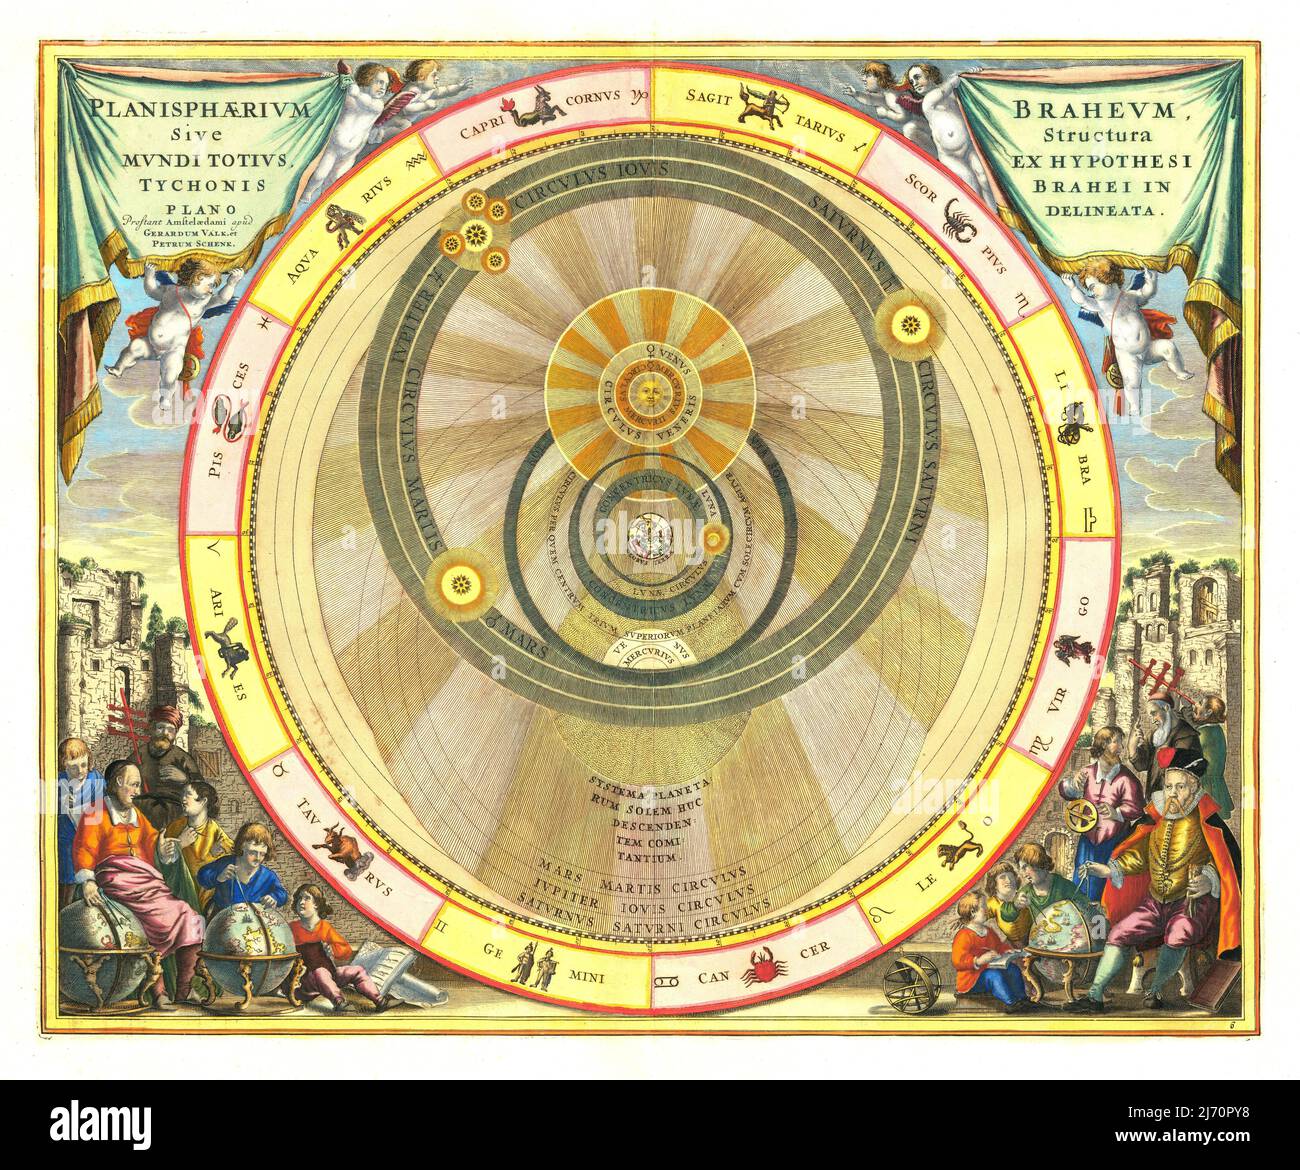 Andreas Cellarius - The Braheum Plane: Or the Structure of the World in a Delineated Plane - Illustration of Tycho Brahe model of the universe - c1661 Stock Photo